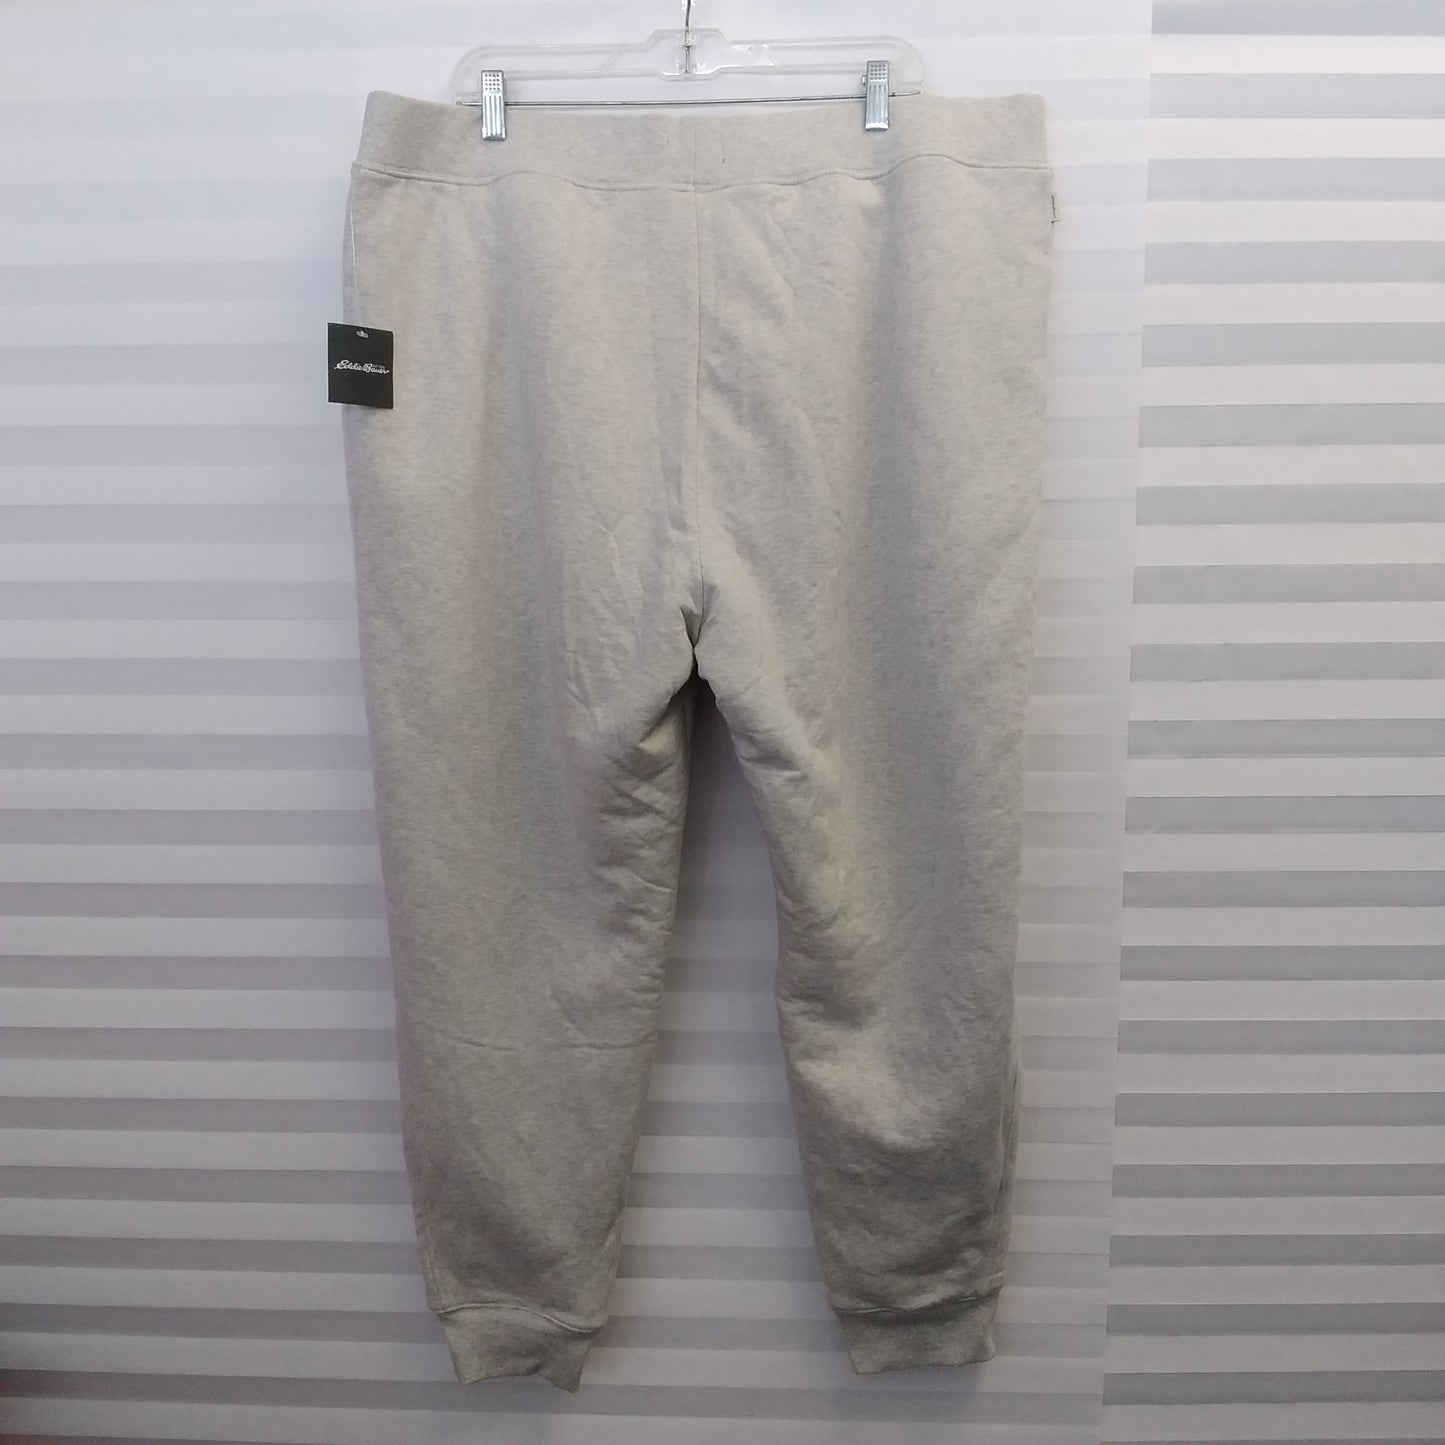 NWT - Eddie Bauer Gray Sherpa-Lined Jogger Pants - 2XL